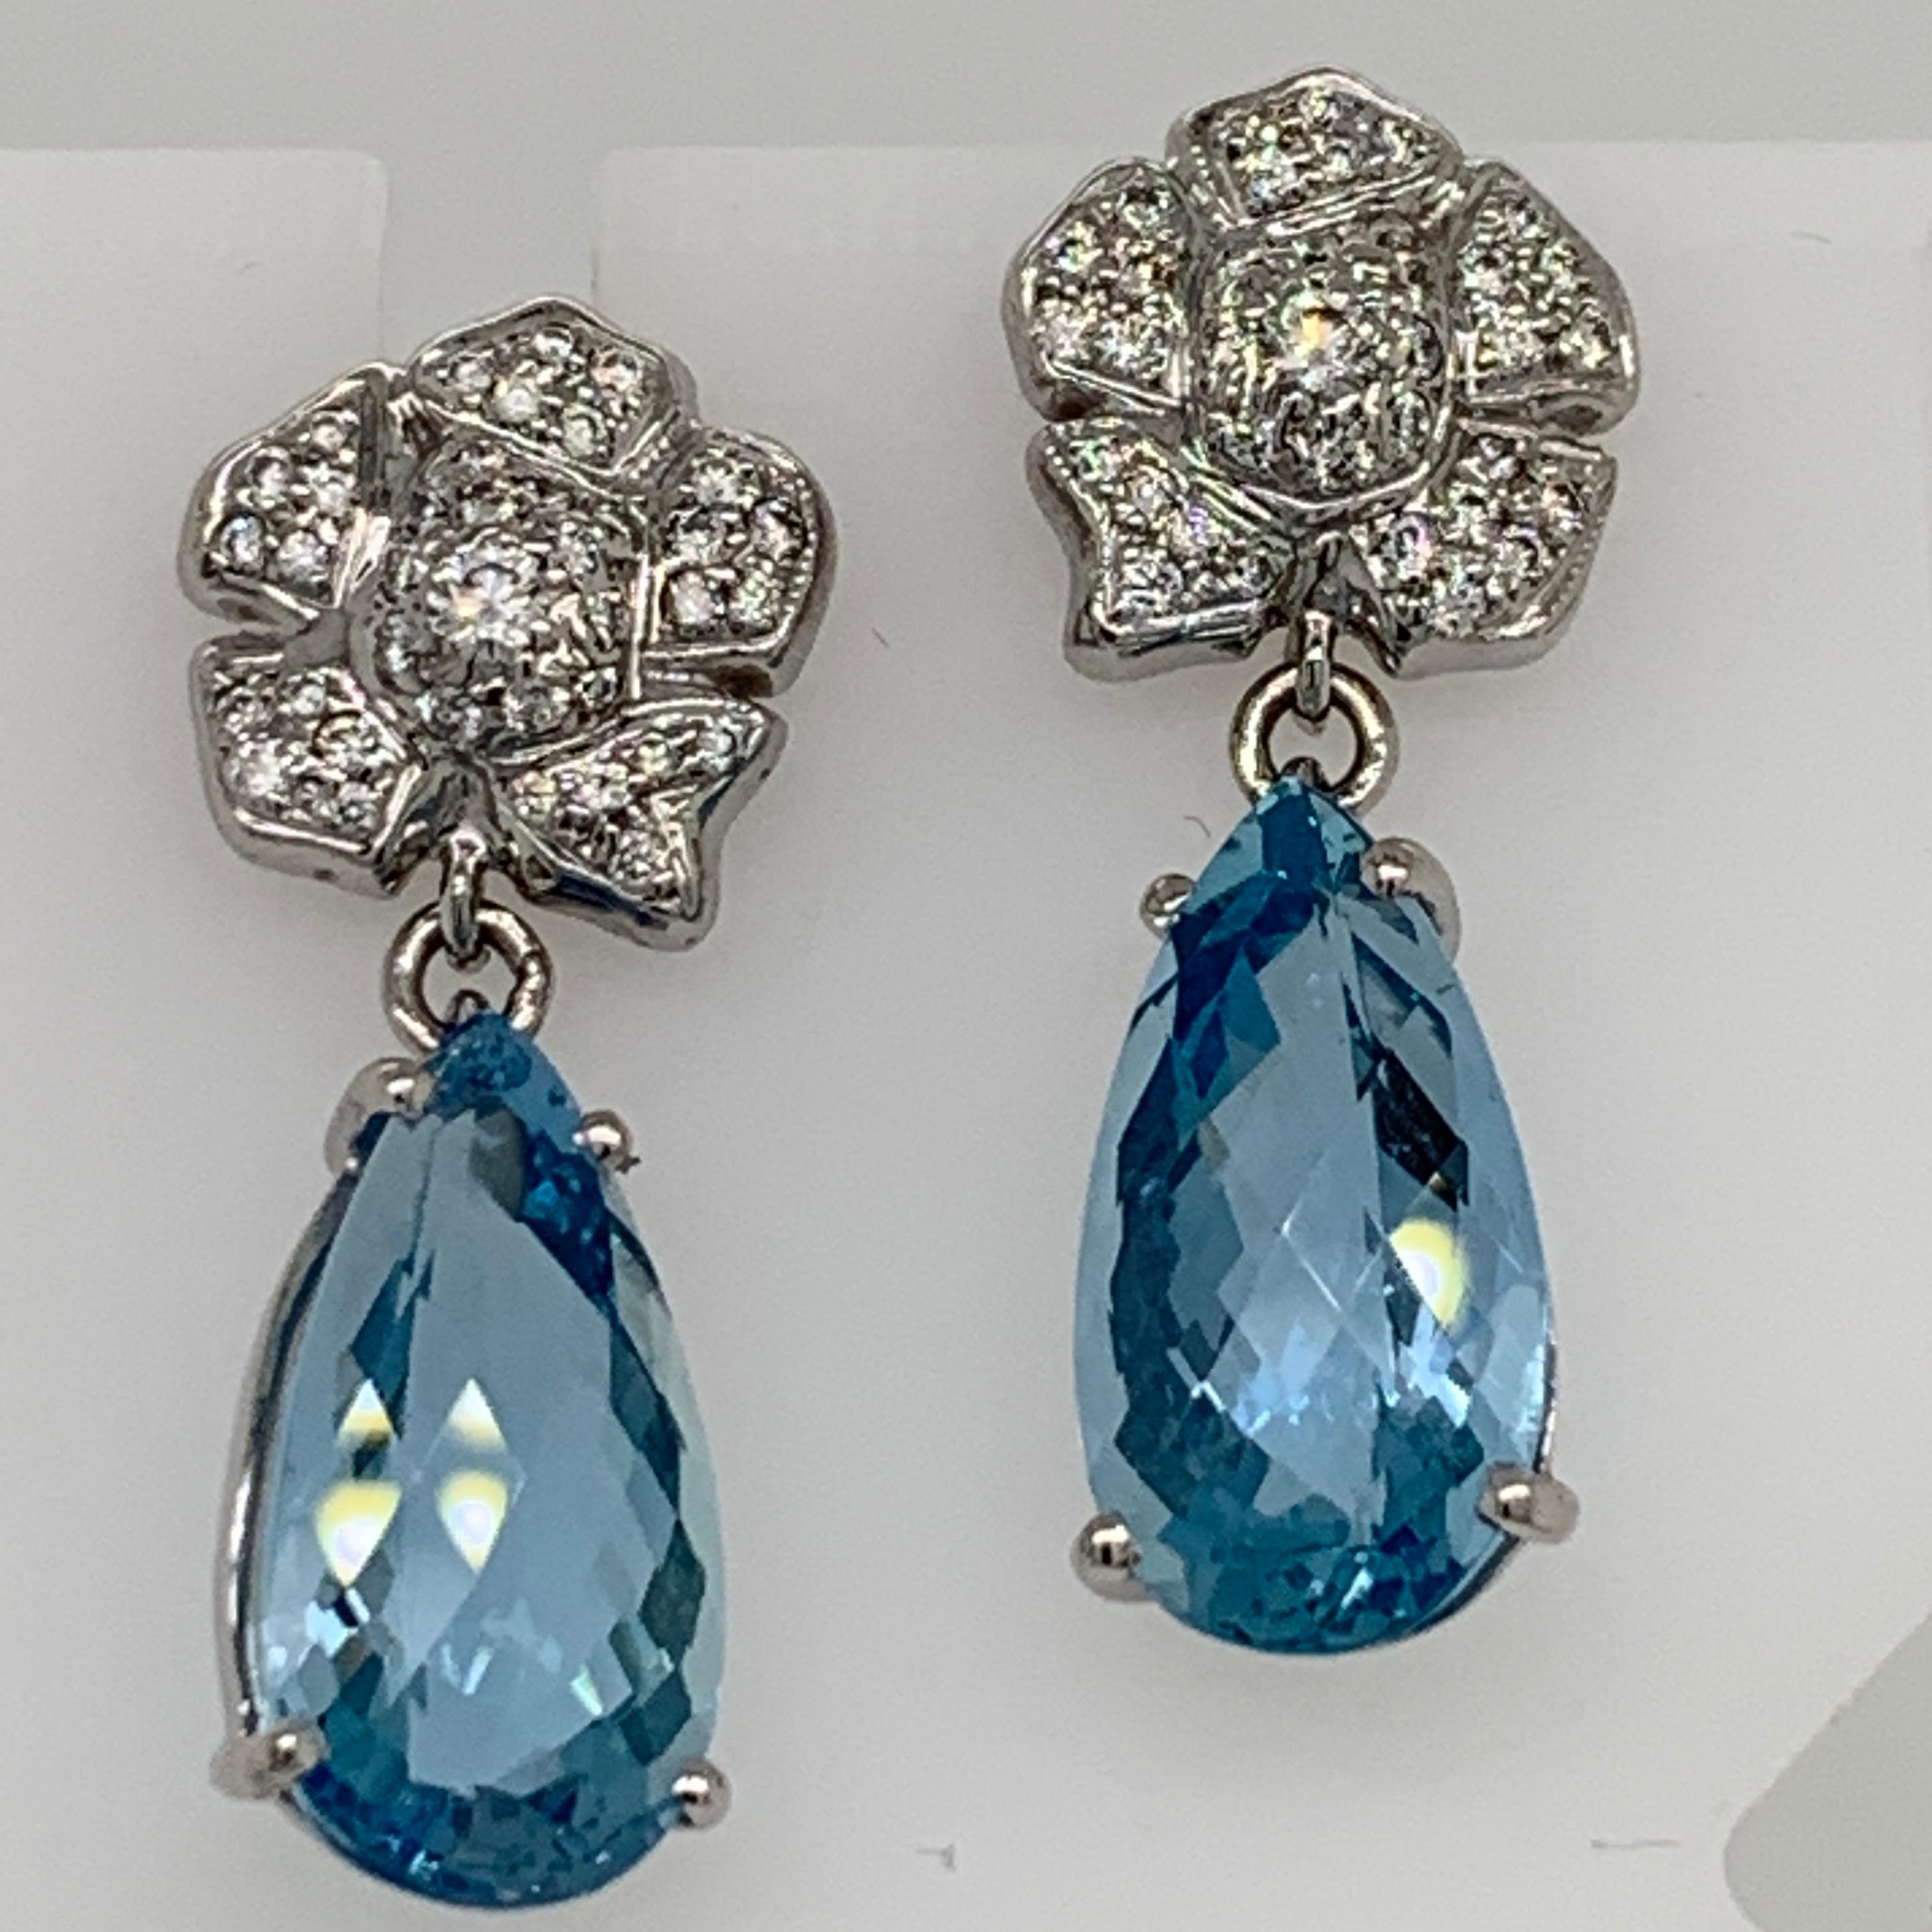 Gorgeous estate earrings totaling appx 7cts.

Stunning pair of natural “Santa Maria” Aquamarines (appx 14.1x7.6x5.5mm each) that are cut as a perfect match and have the “checkerboard” pattern. 

They weigh 3.17ct and 3.14ct, Aquamarine weight